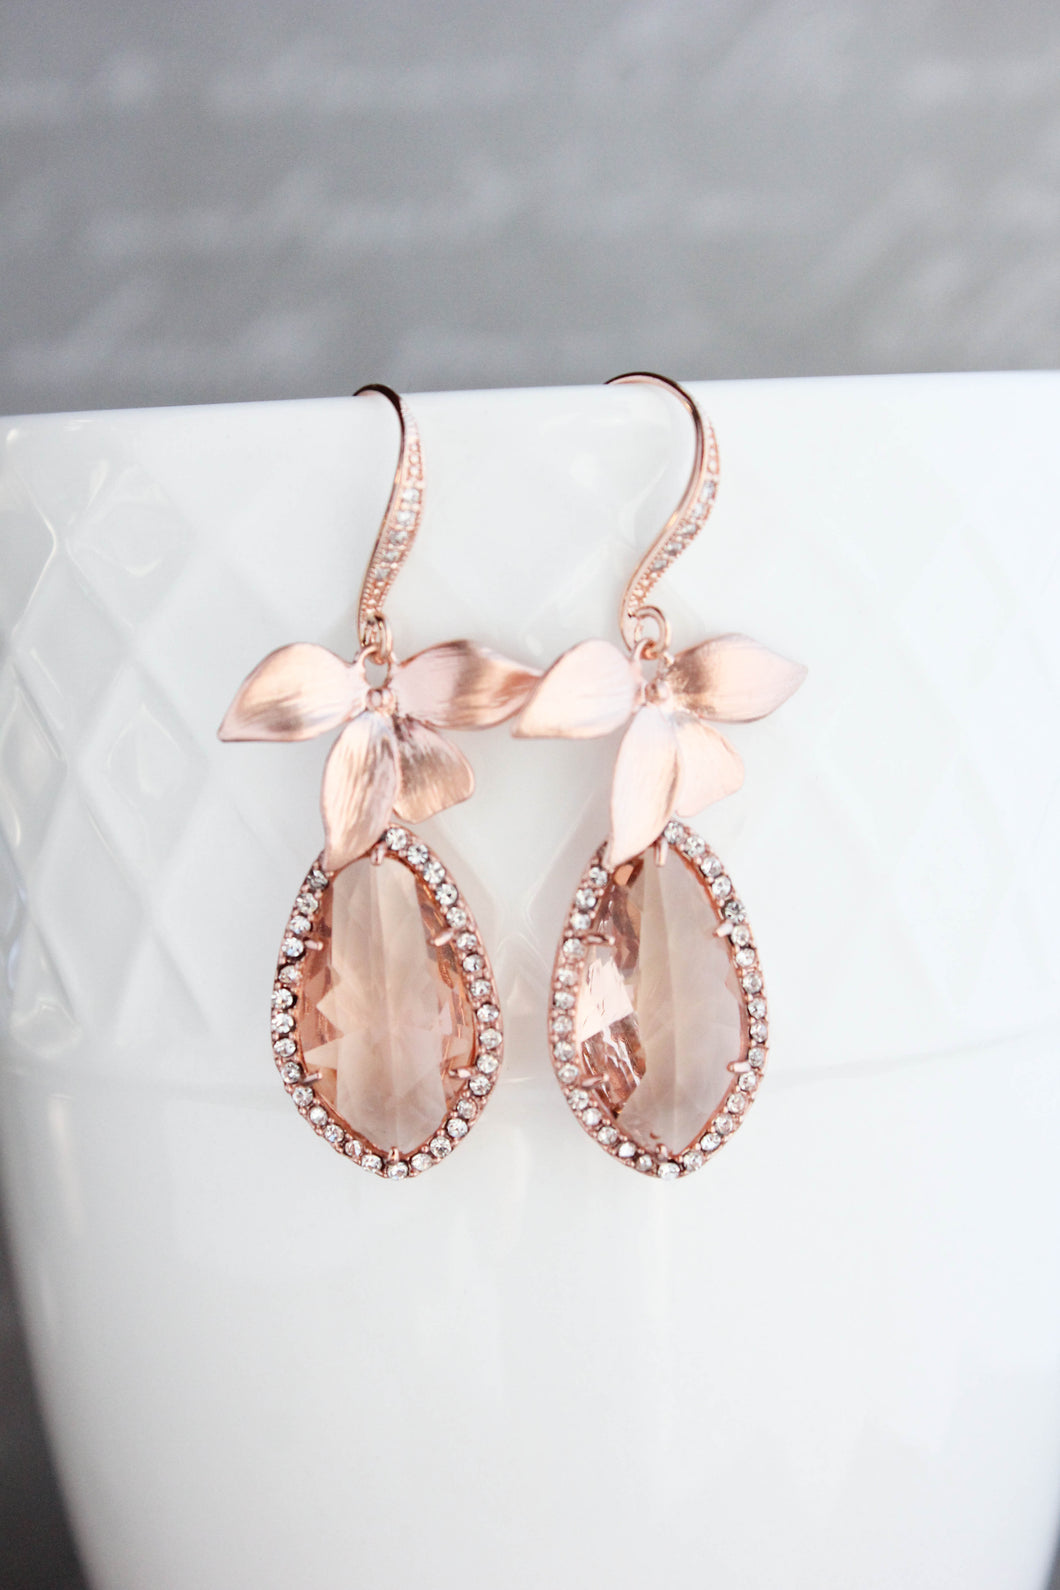 Orchid Sparkle Earrings - Peach/Rose Gold